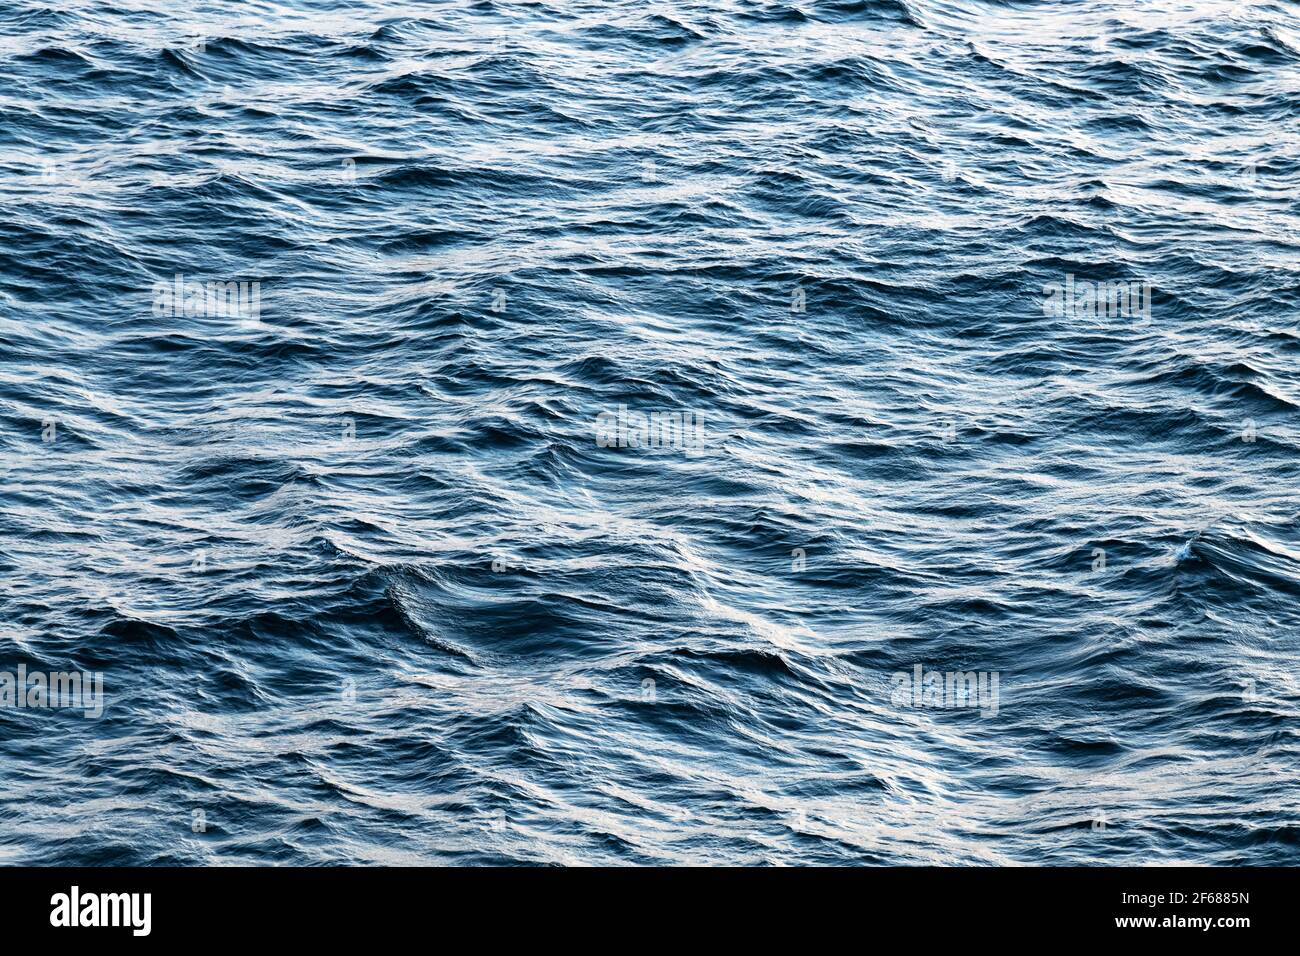 Ocean water abstract background closeup Stock Photo